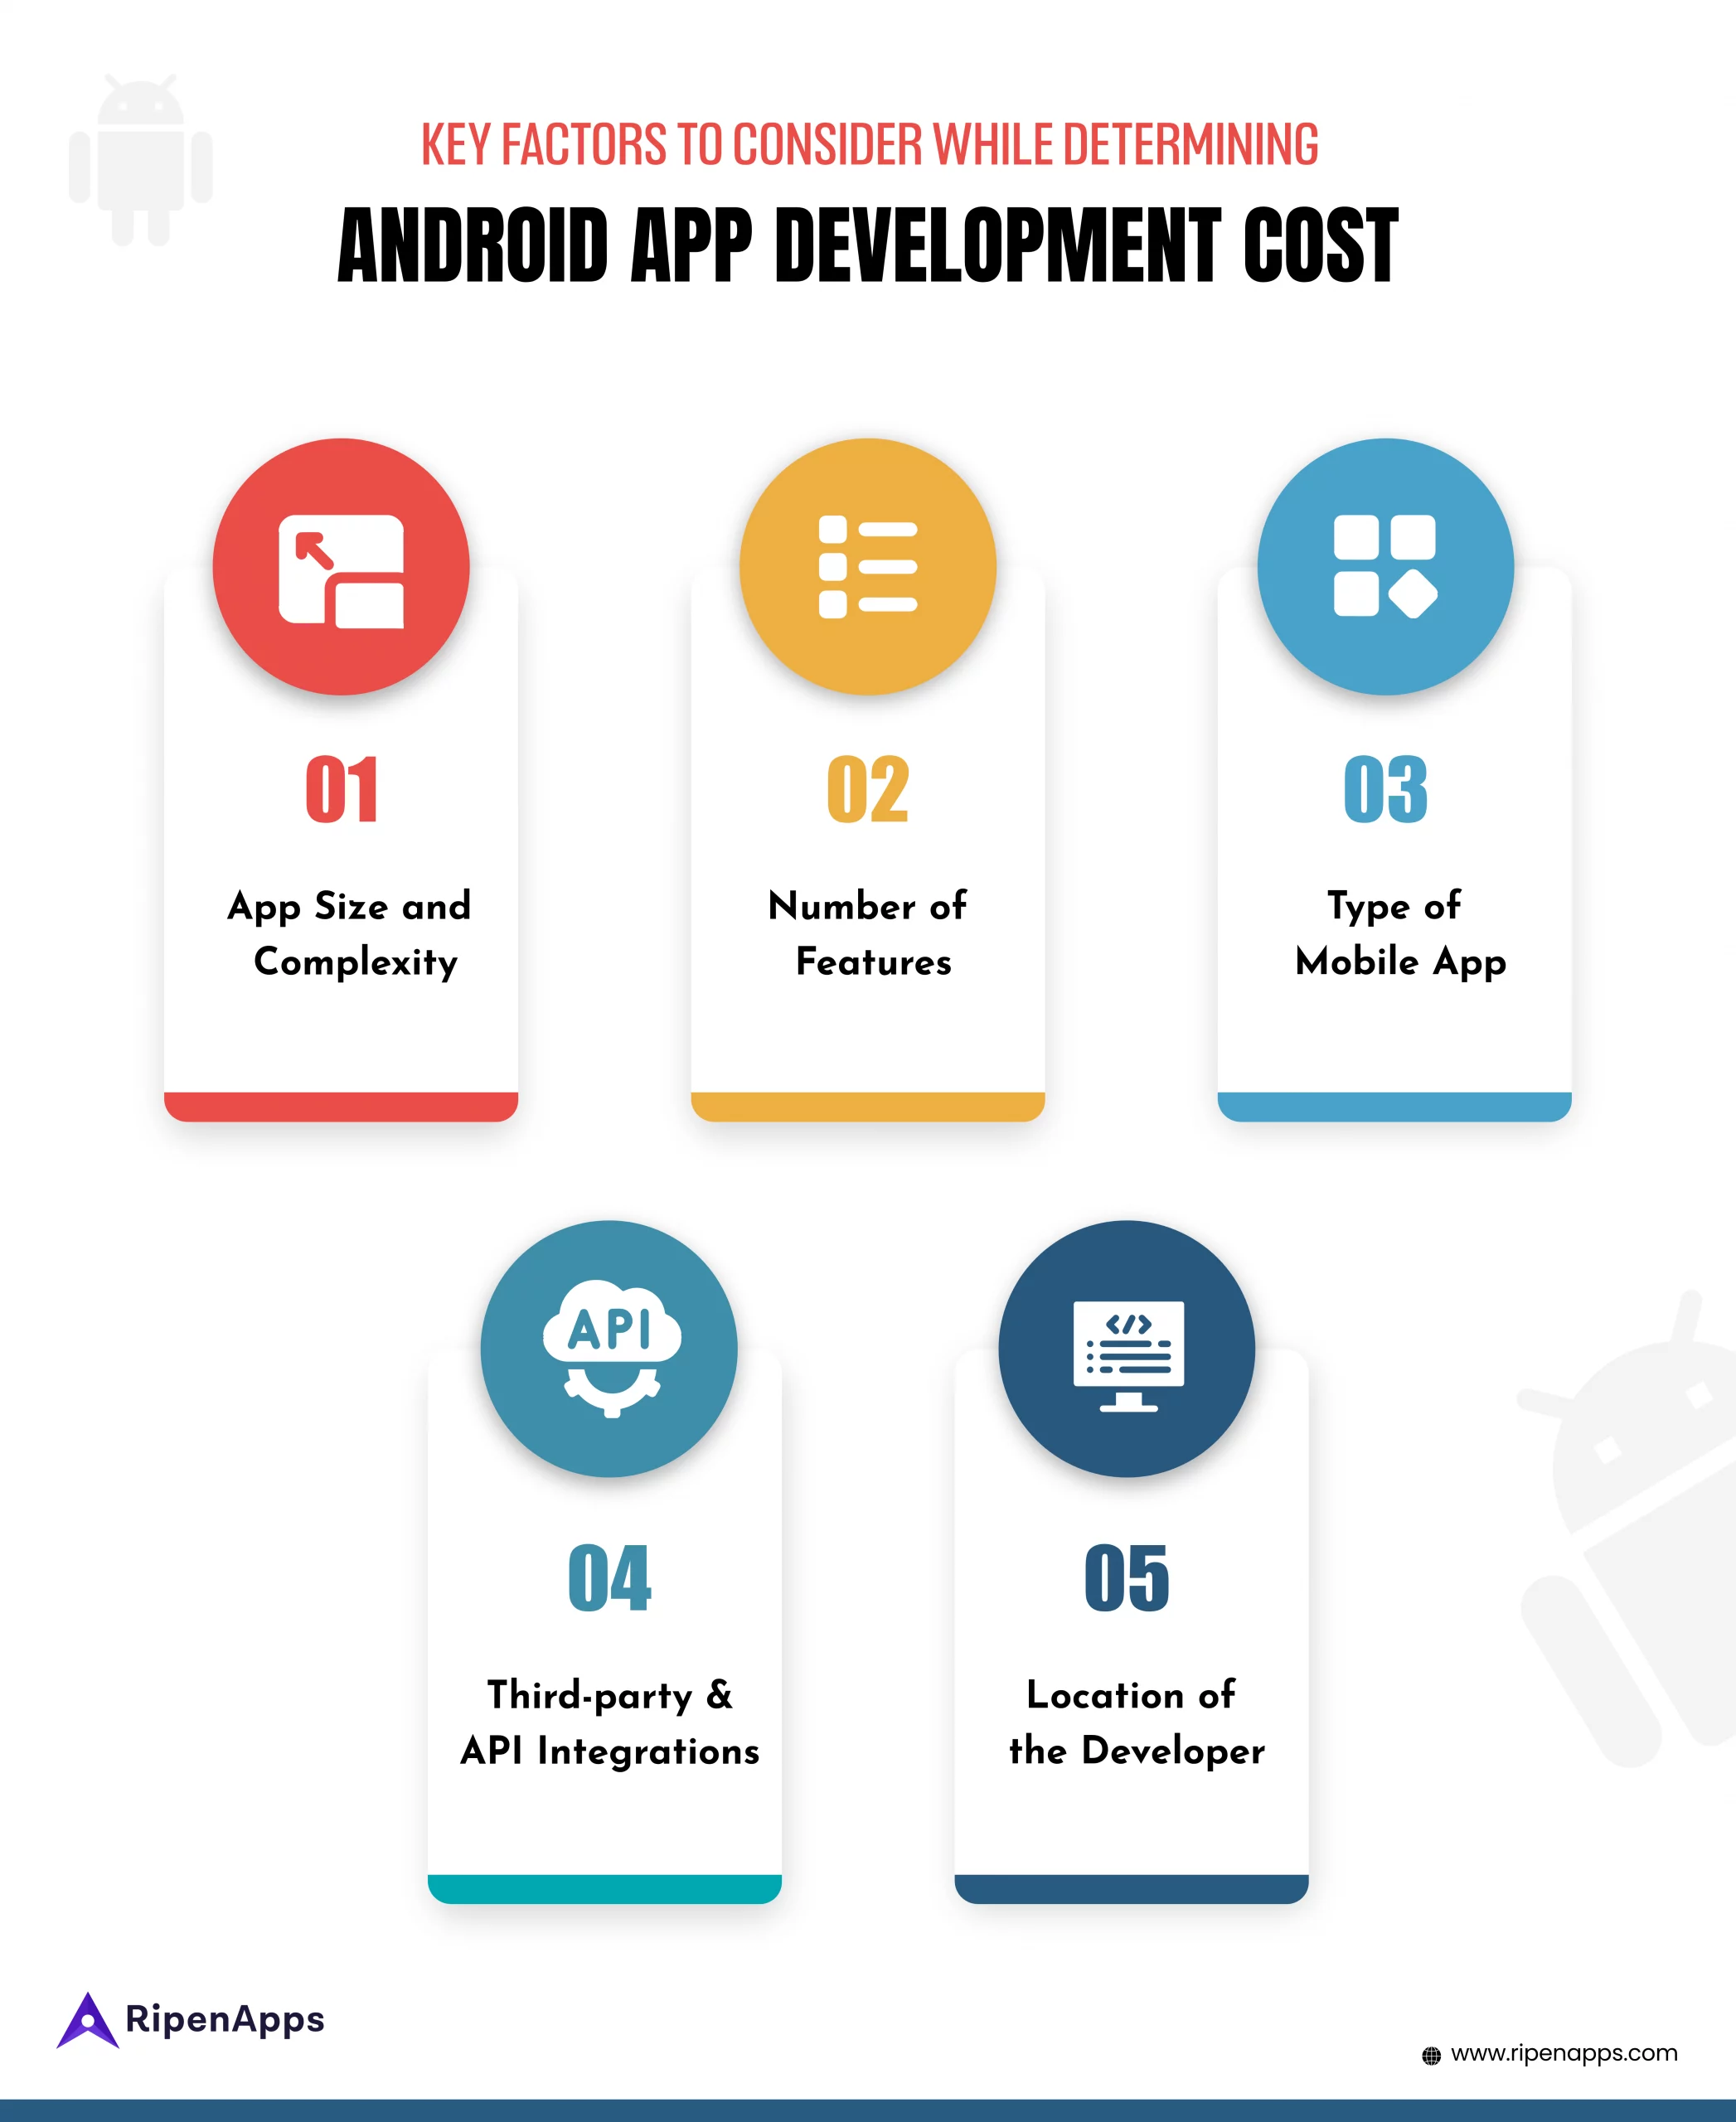 Key Factors to Consider While Determining Android App Development Cost